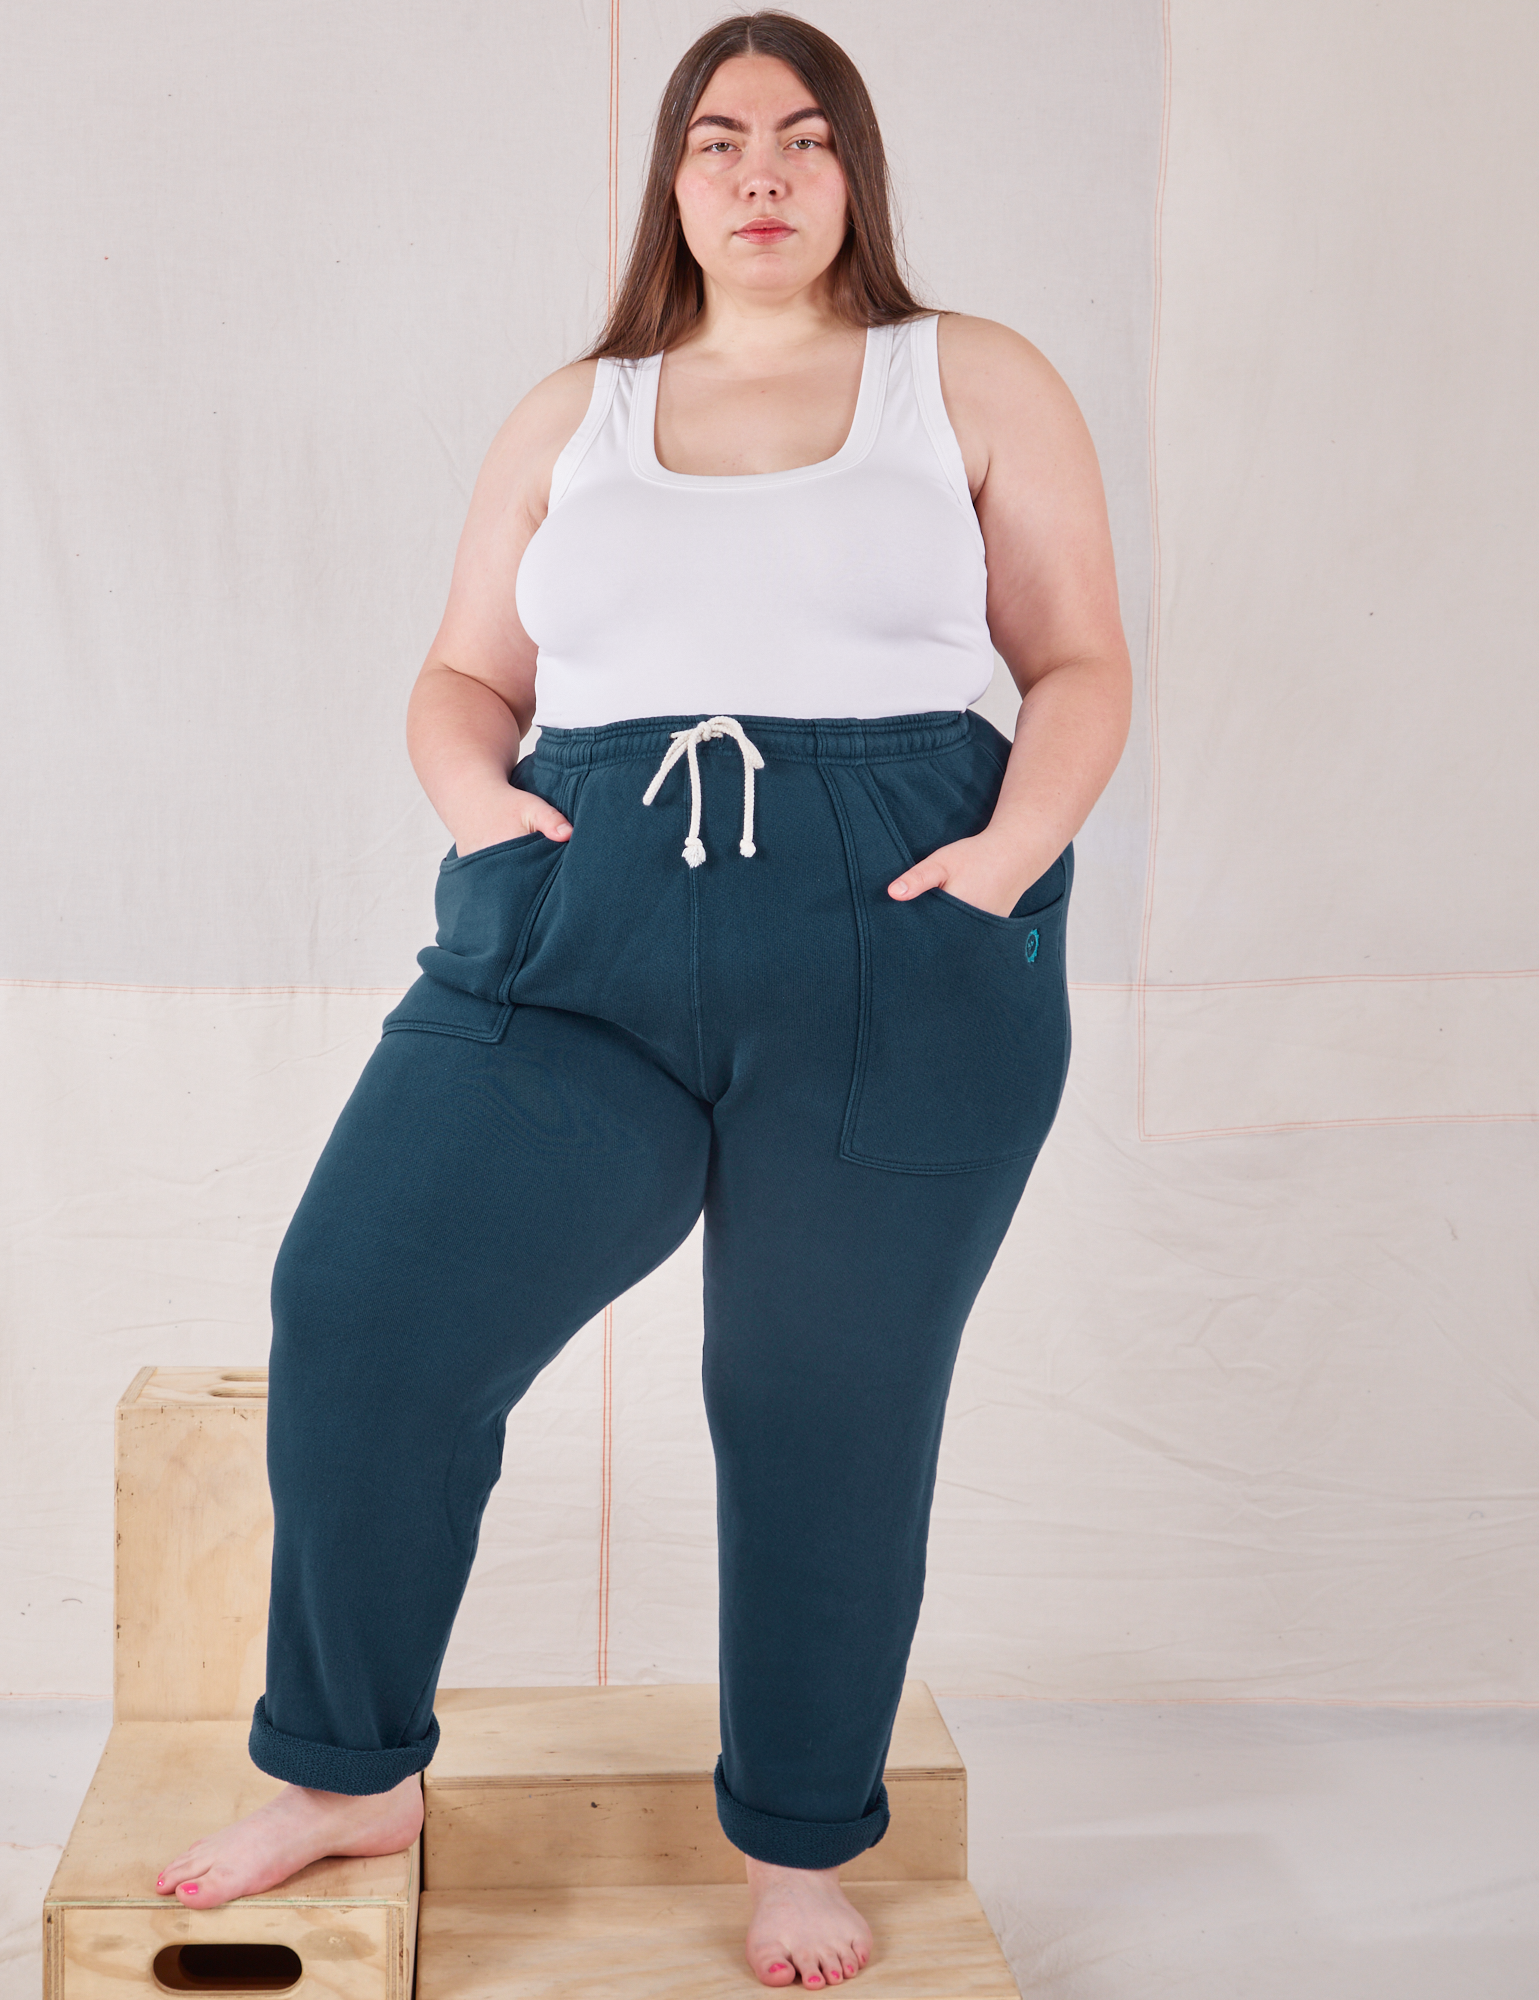 Marielena is 5&#39;8&quot; and wearing 1XL Rolled Cuff Sweat Pants in Lagoon paired with vintage off-white Cropped Tank